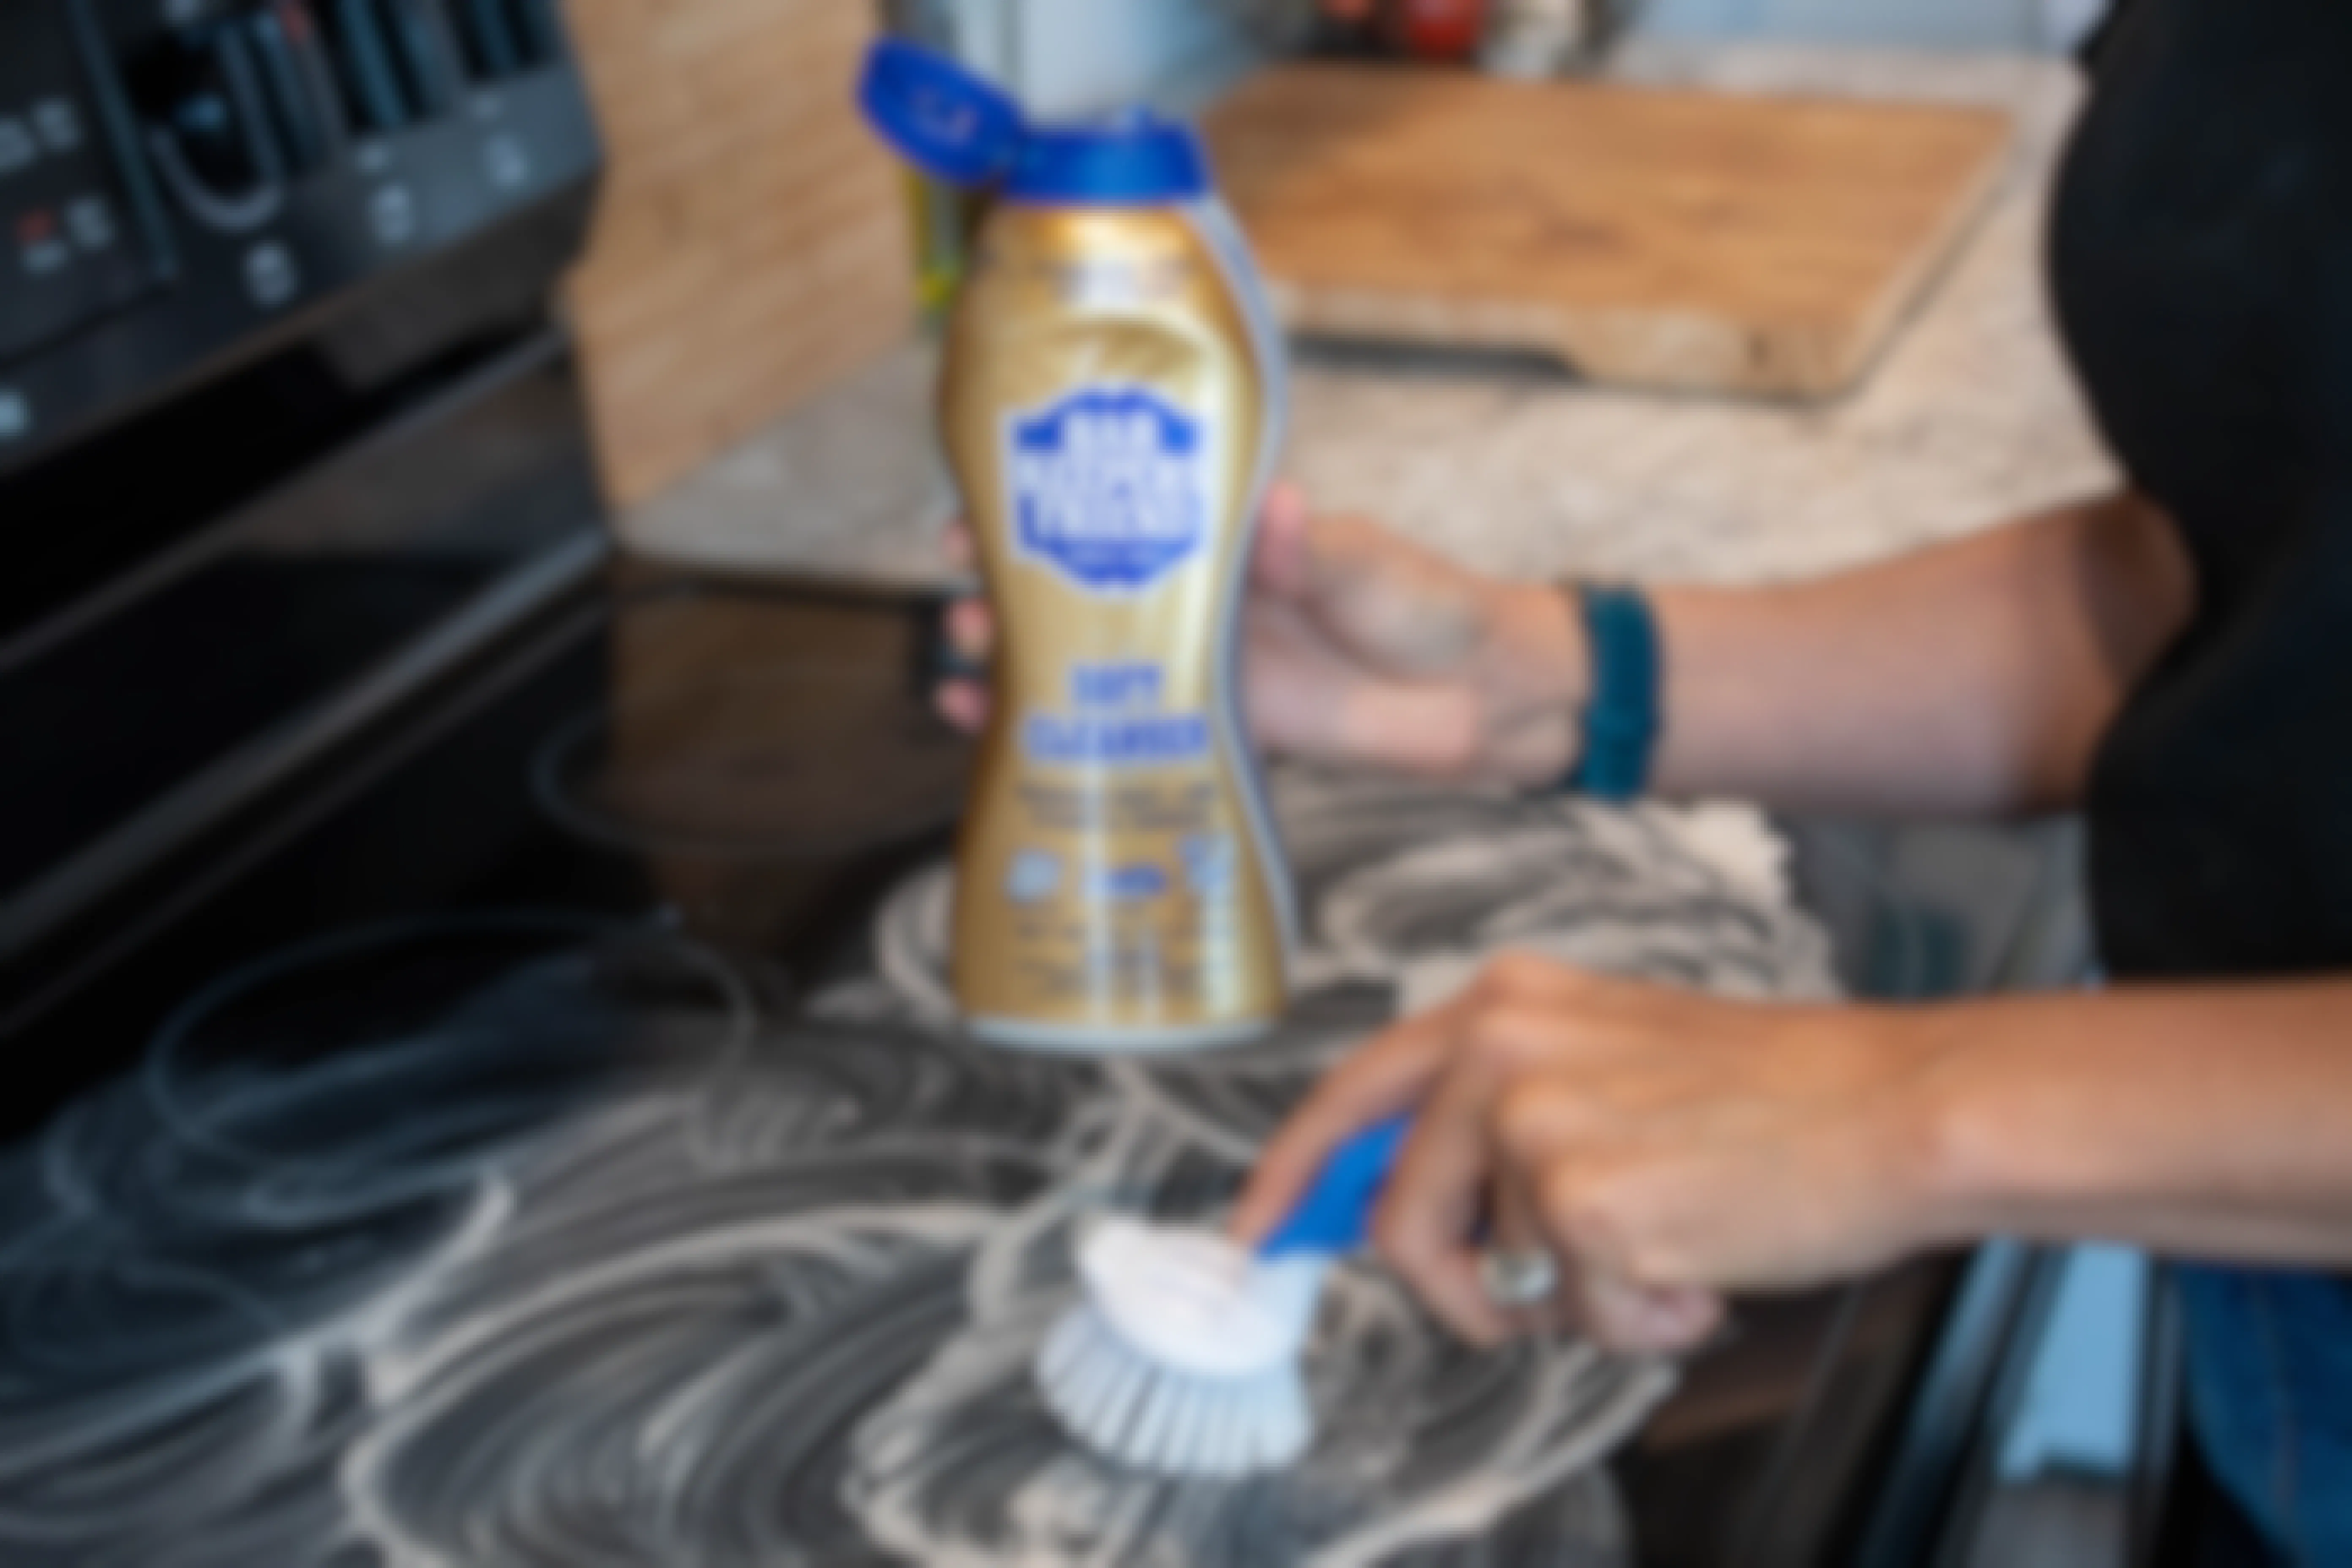 Bar Keepers Friend being used to clean a cooktop stove